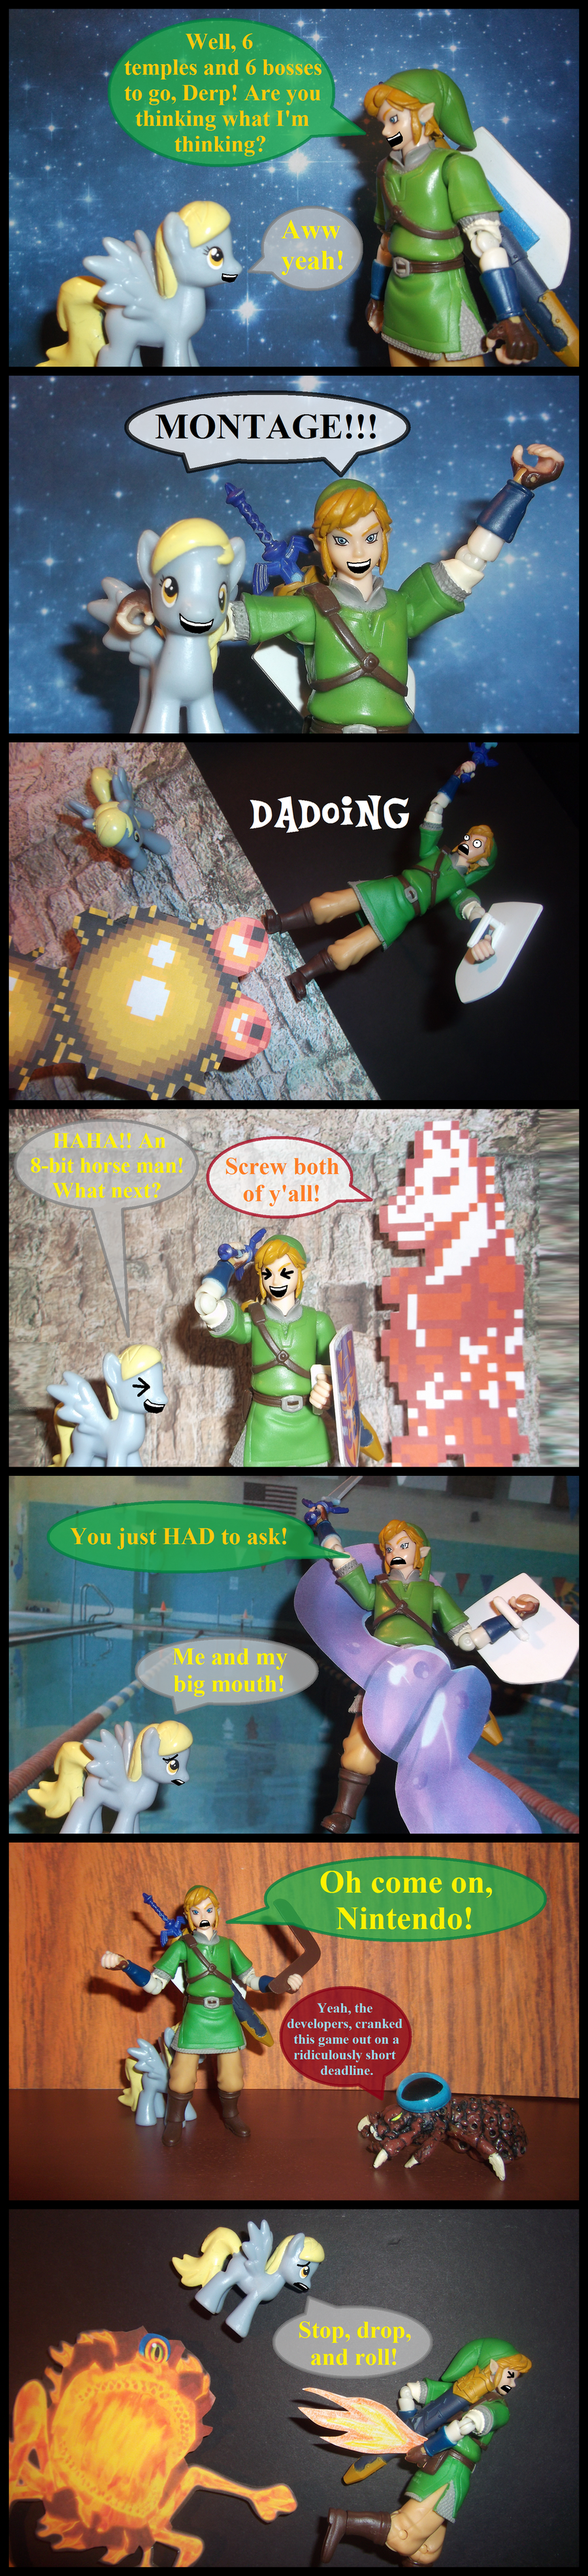 the_legend_of_zelda__pain_in_the_ass__pt__37__by_therockinstallion-danb03v.png